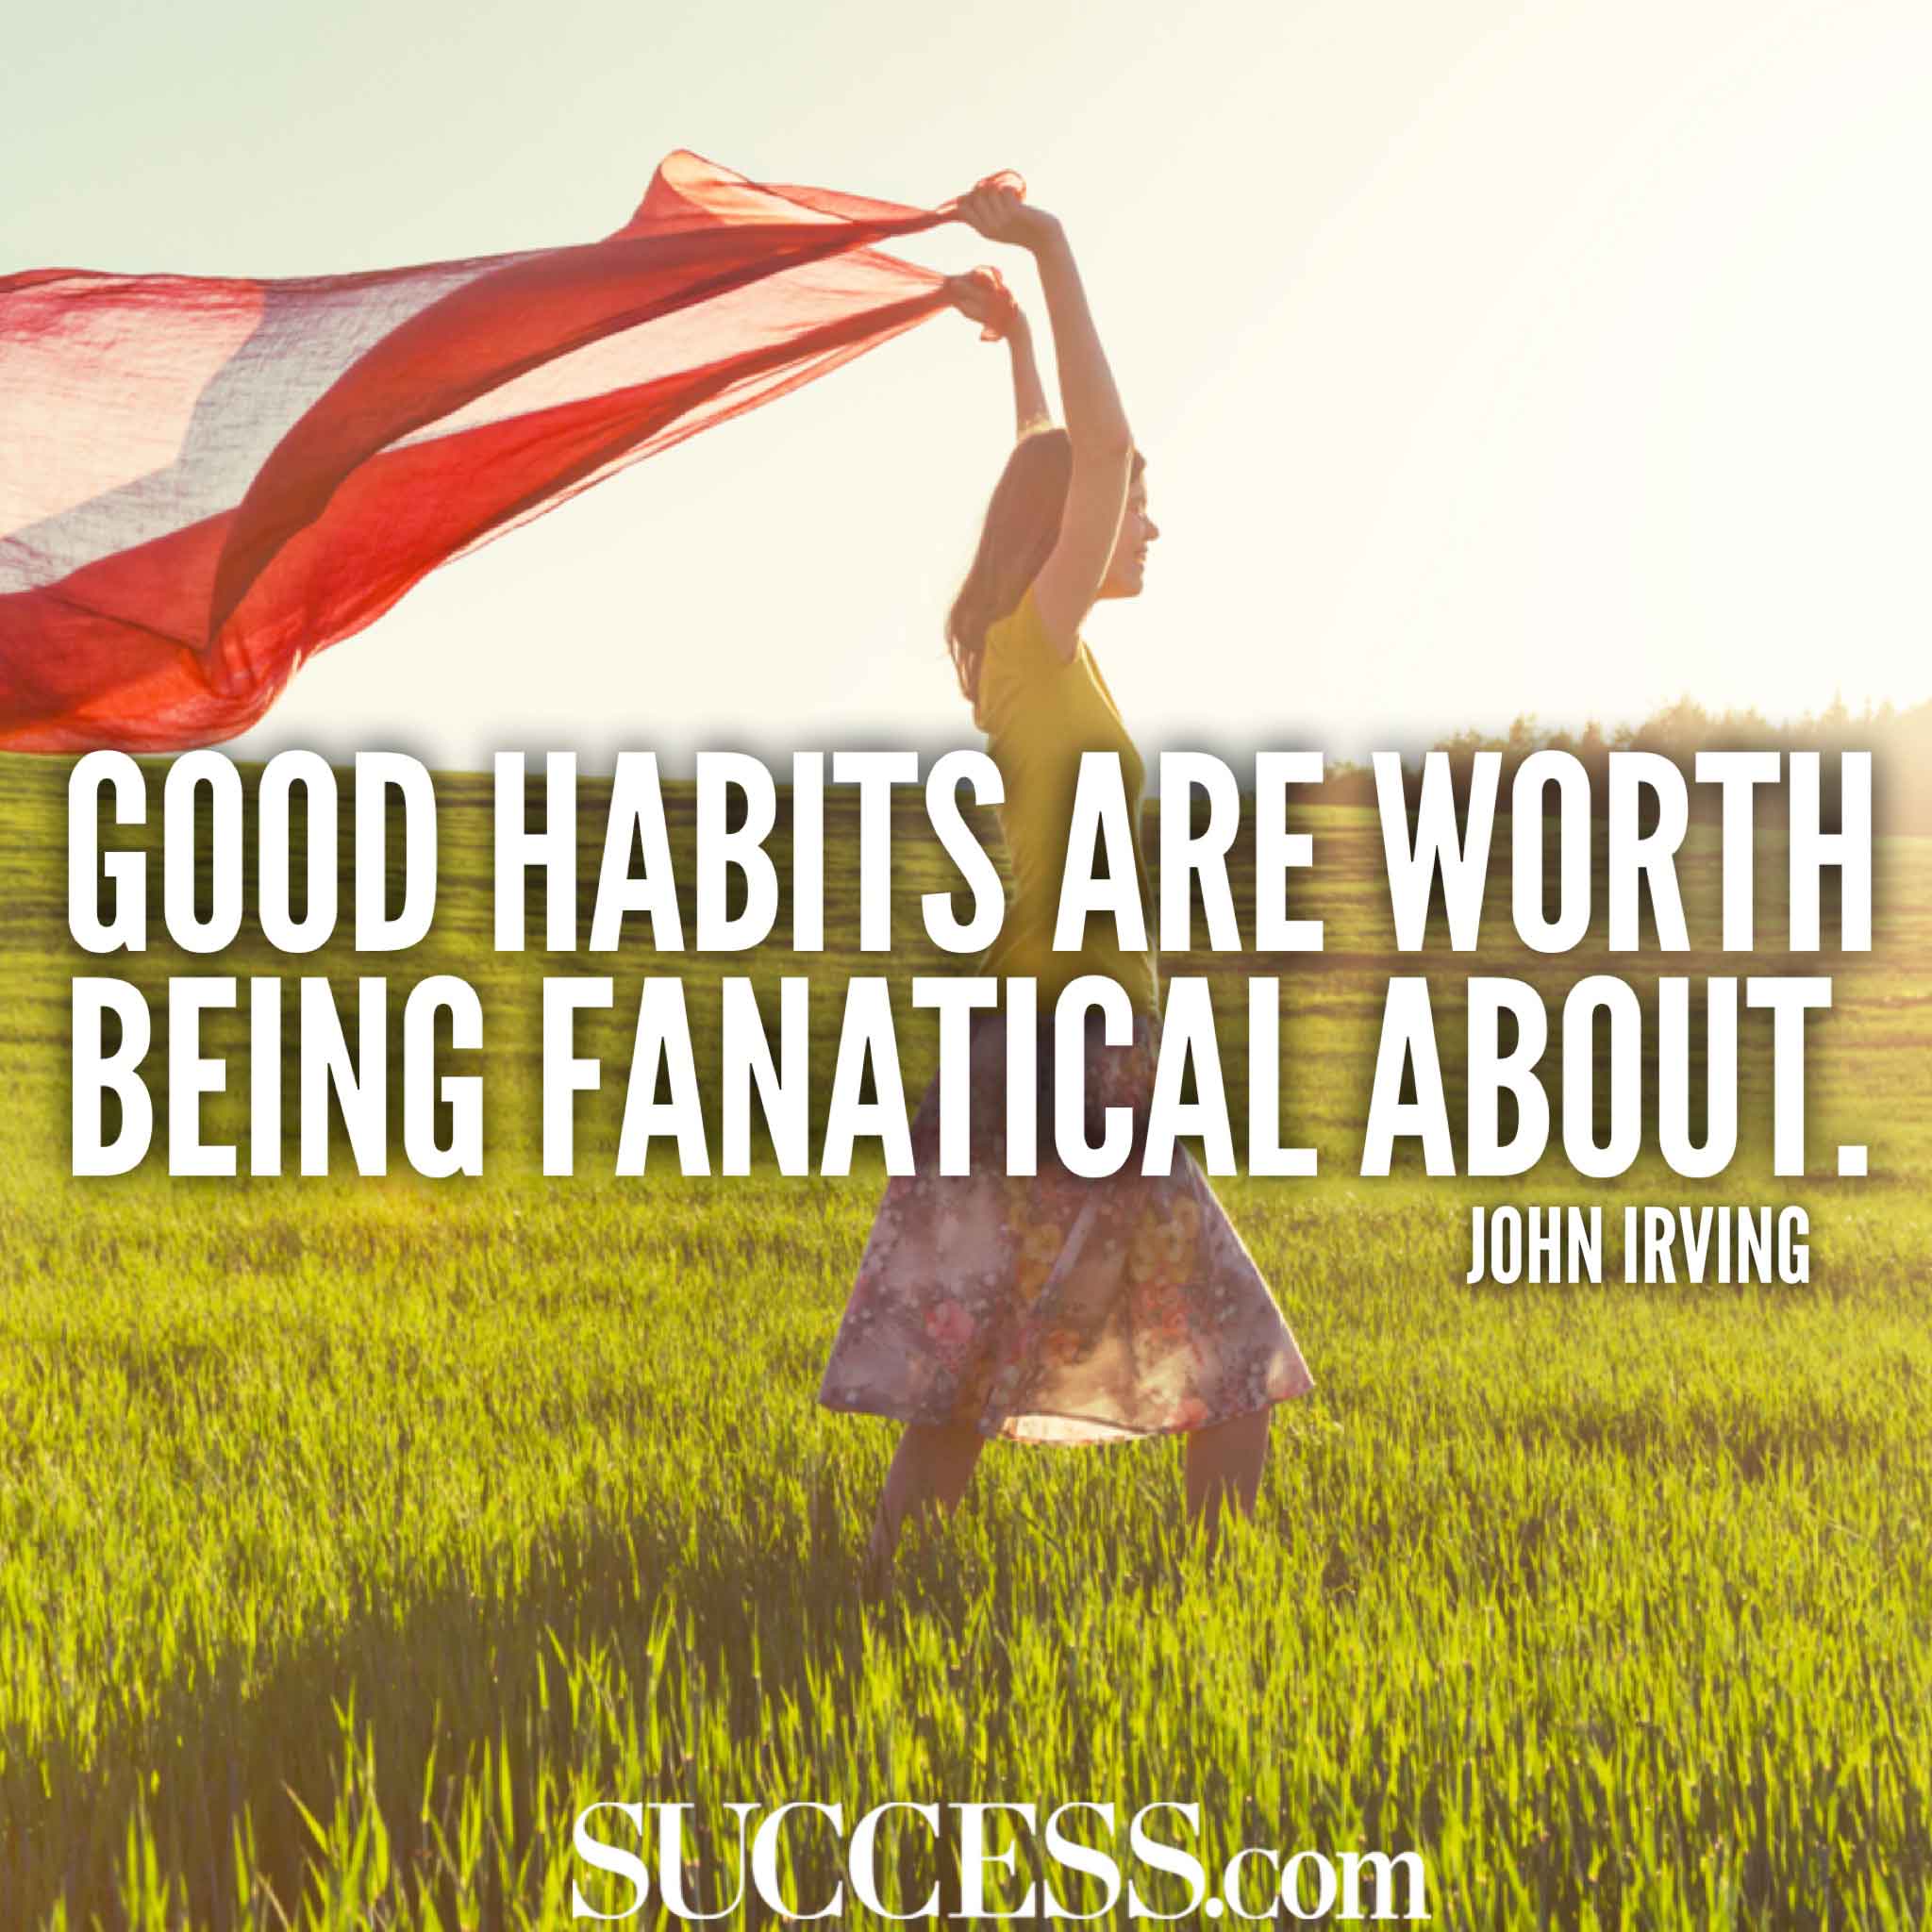 17 Motivational Quotes to Inspire Successful Habits